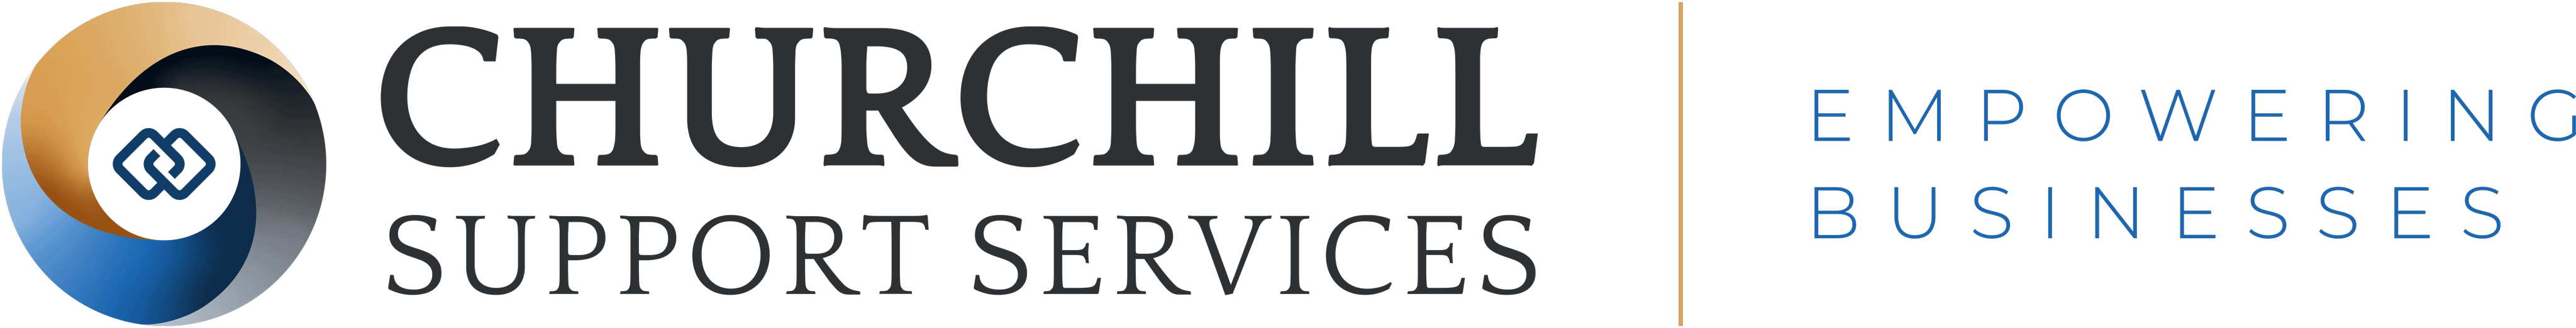 Churchill Support Services